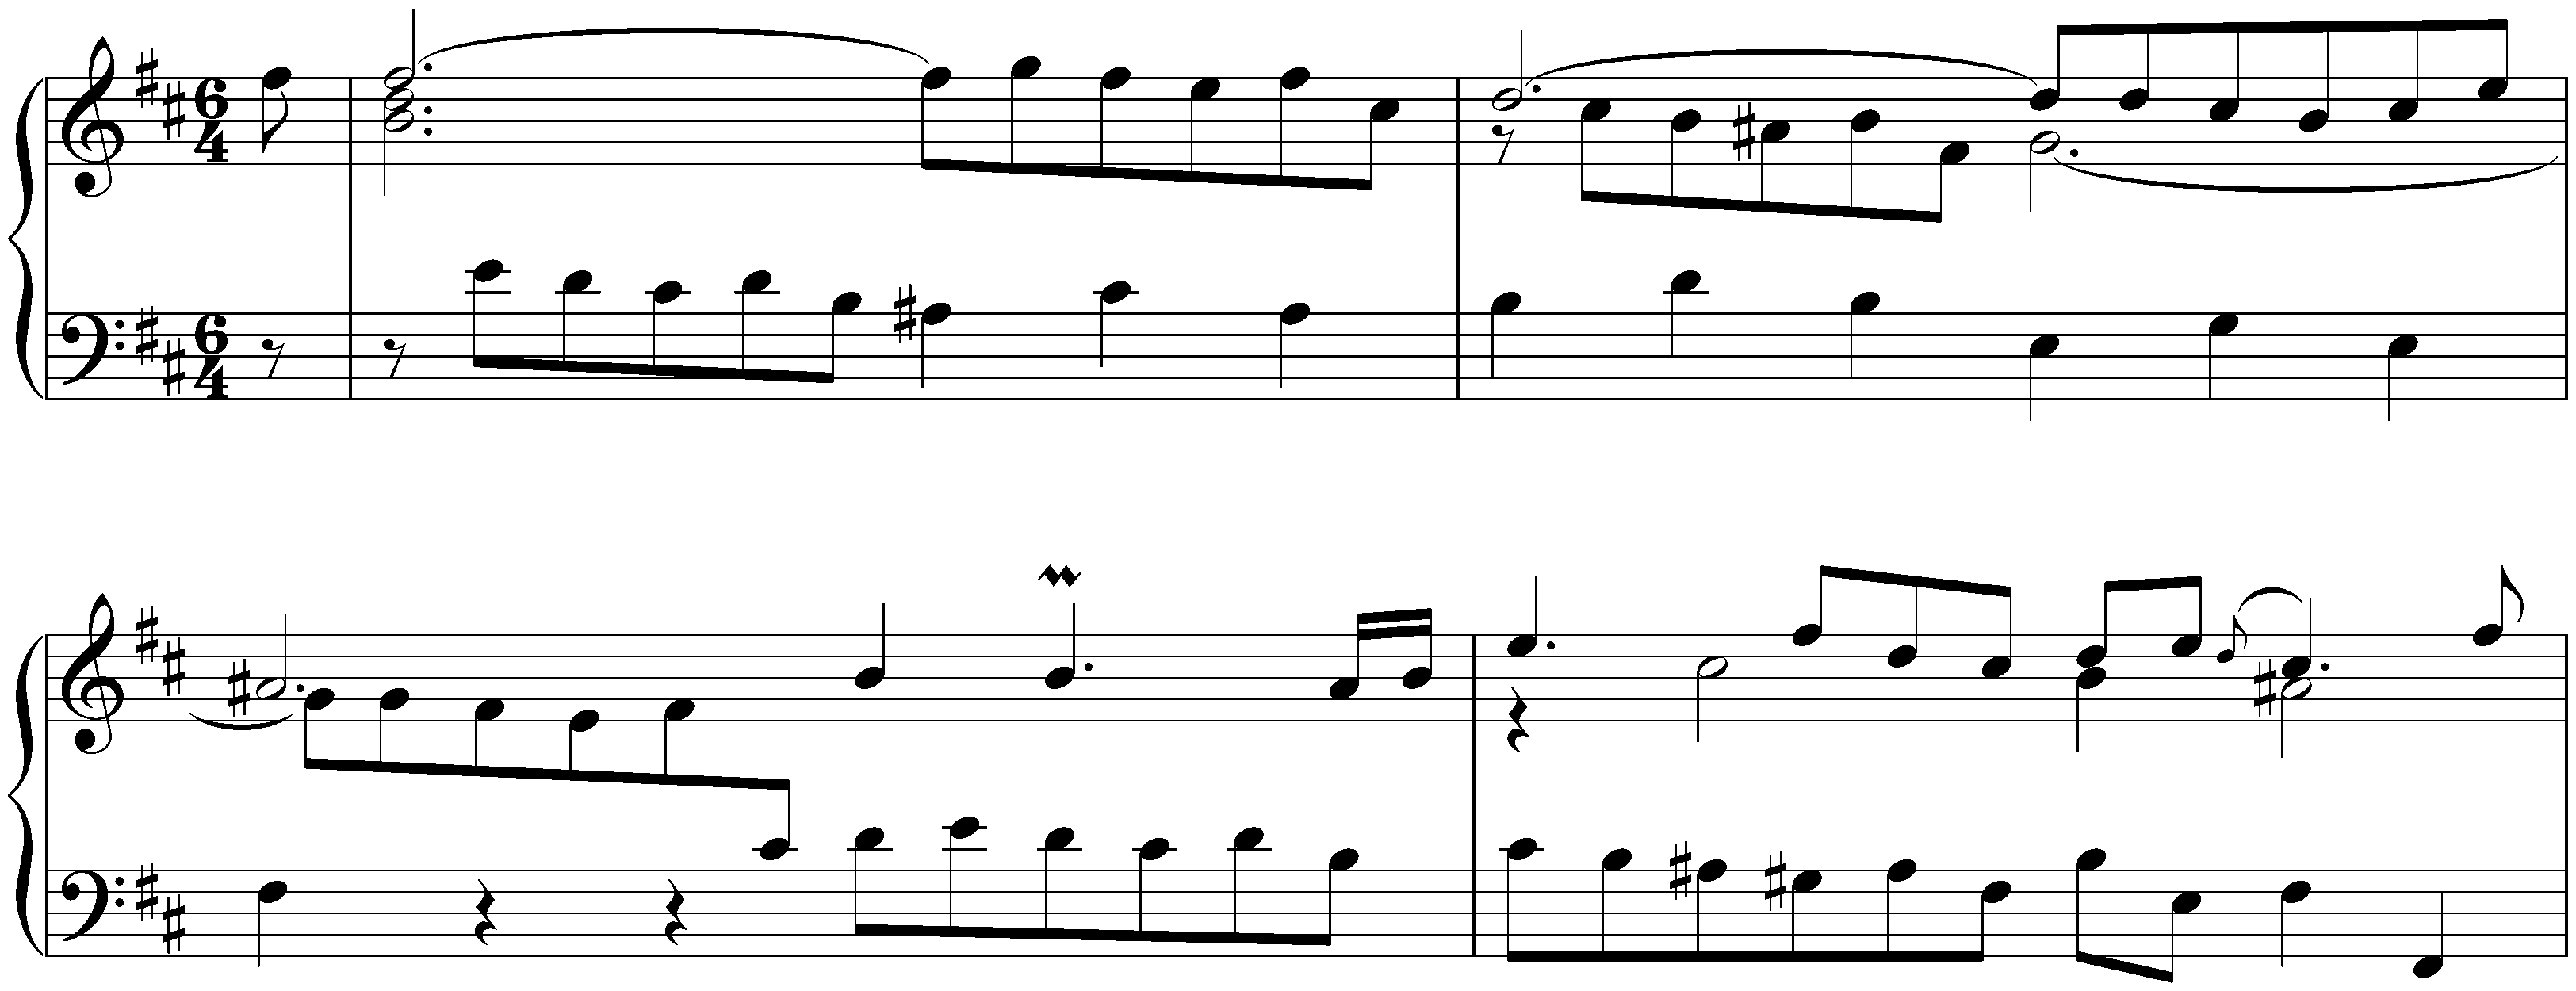 French Suite no. 3 in B minor, BWV 814; 2. Courante